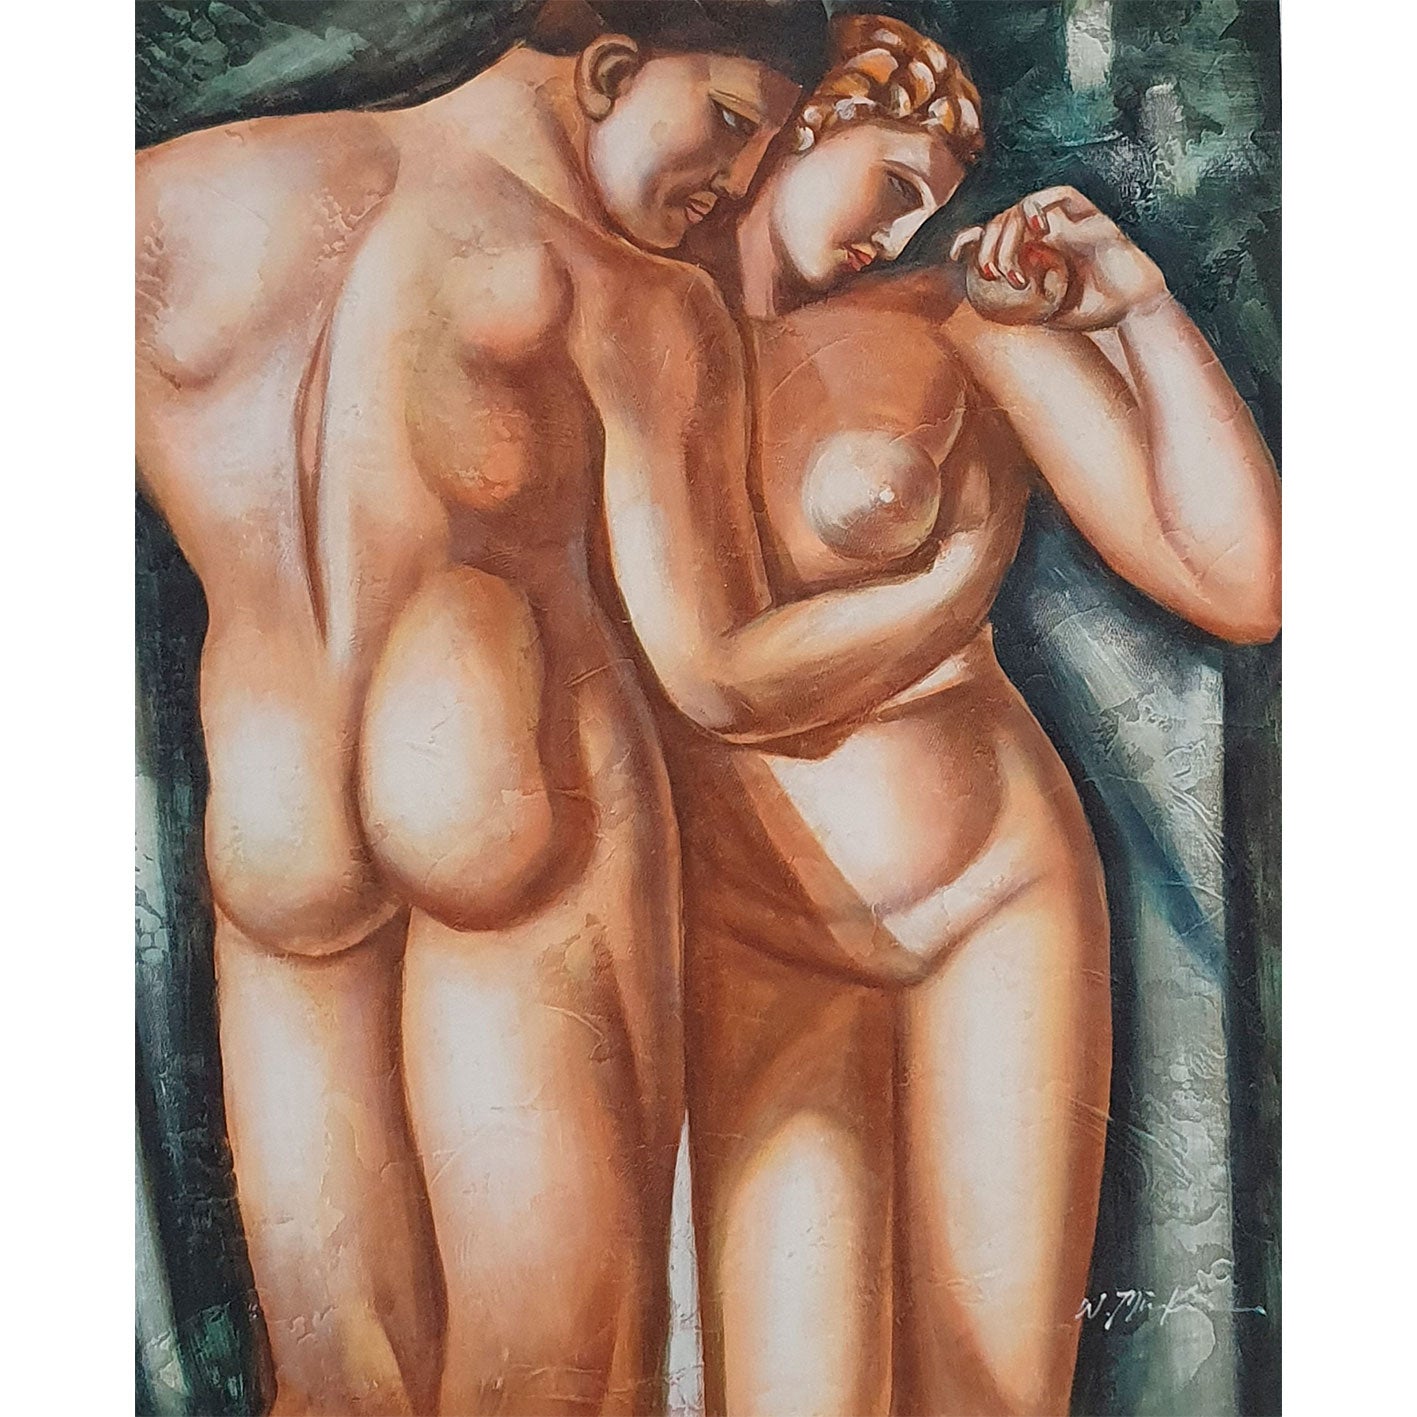 Painting Reproduction Lempicka nudes